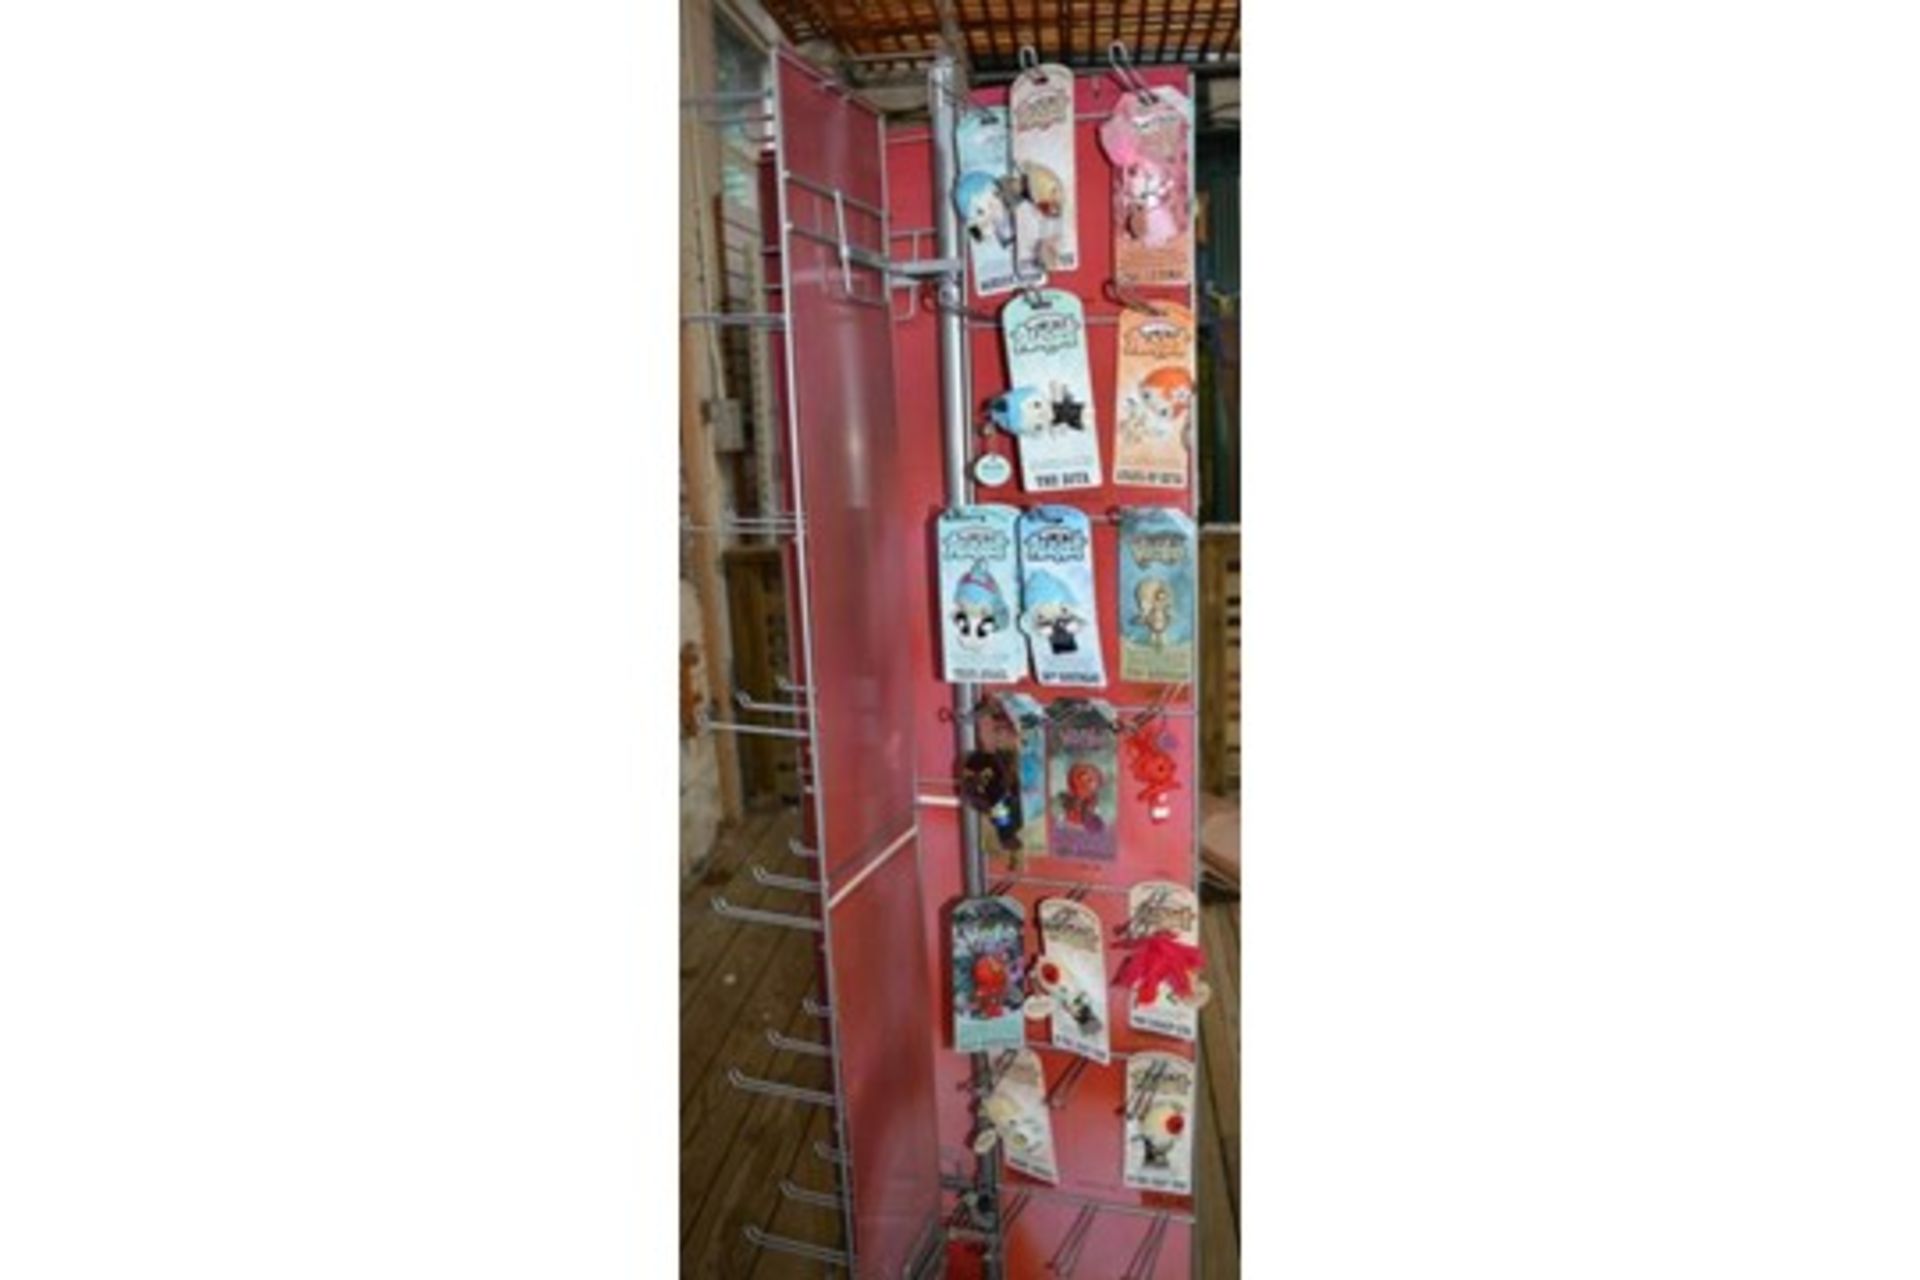 27 x Retail Carousel Display Stands With Approximately 2,800 Items of Resale Stock - Includes - Image 9 of 61